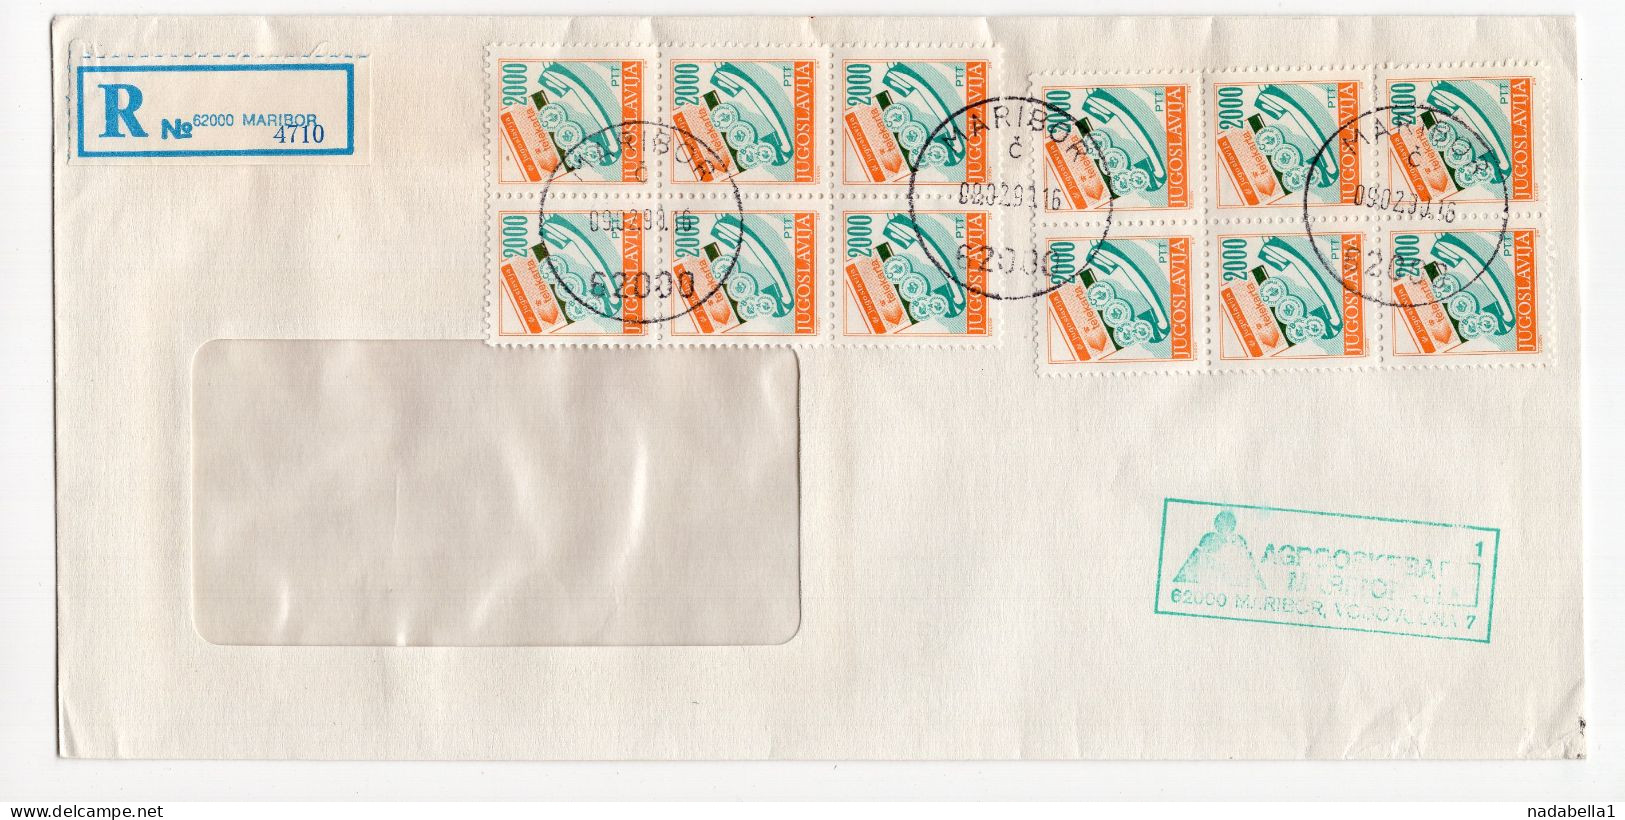 09.02.1990. INFLATIONARY MAIL,YUGOSLAVIA,SLOVENIA,MARIBOR RECORDED COVER,INFLATION - Covers & Documents